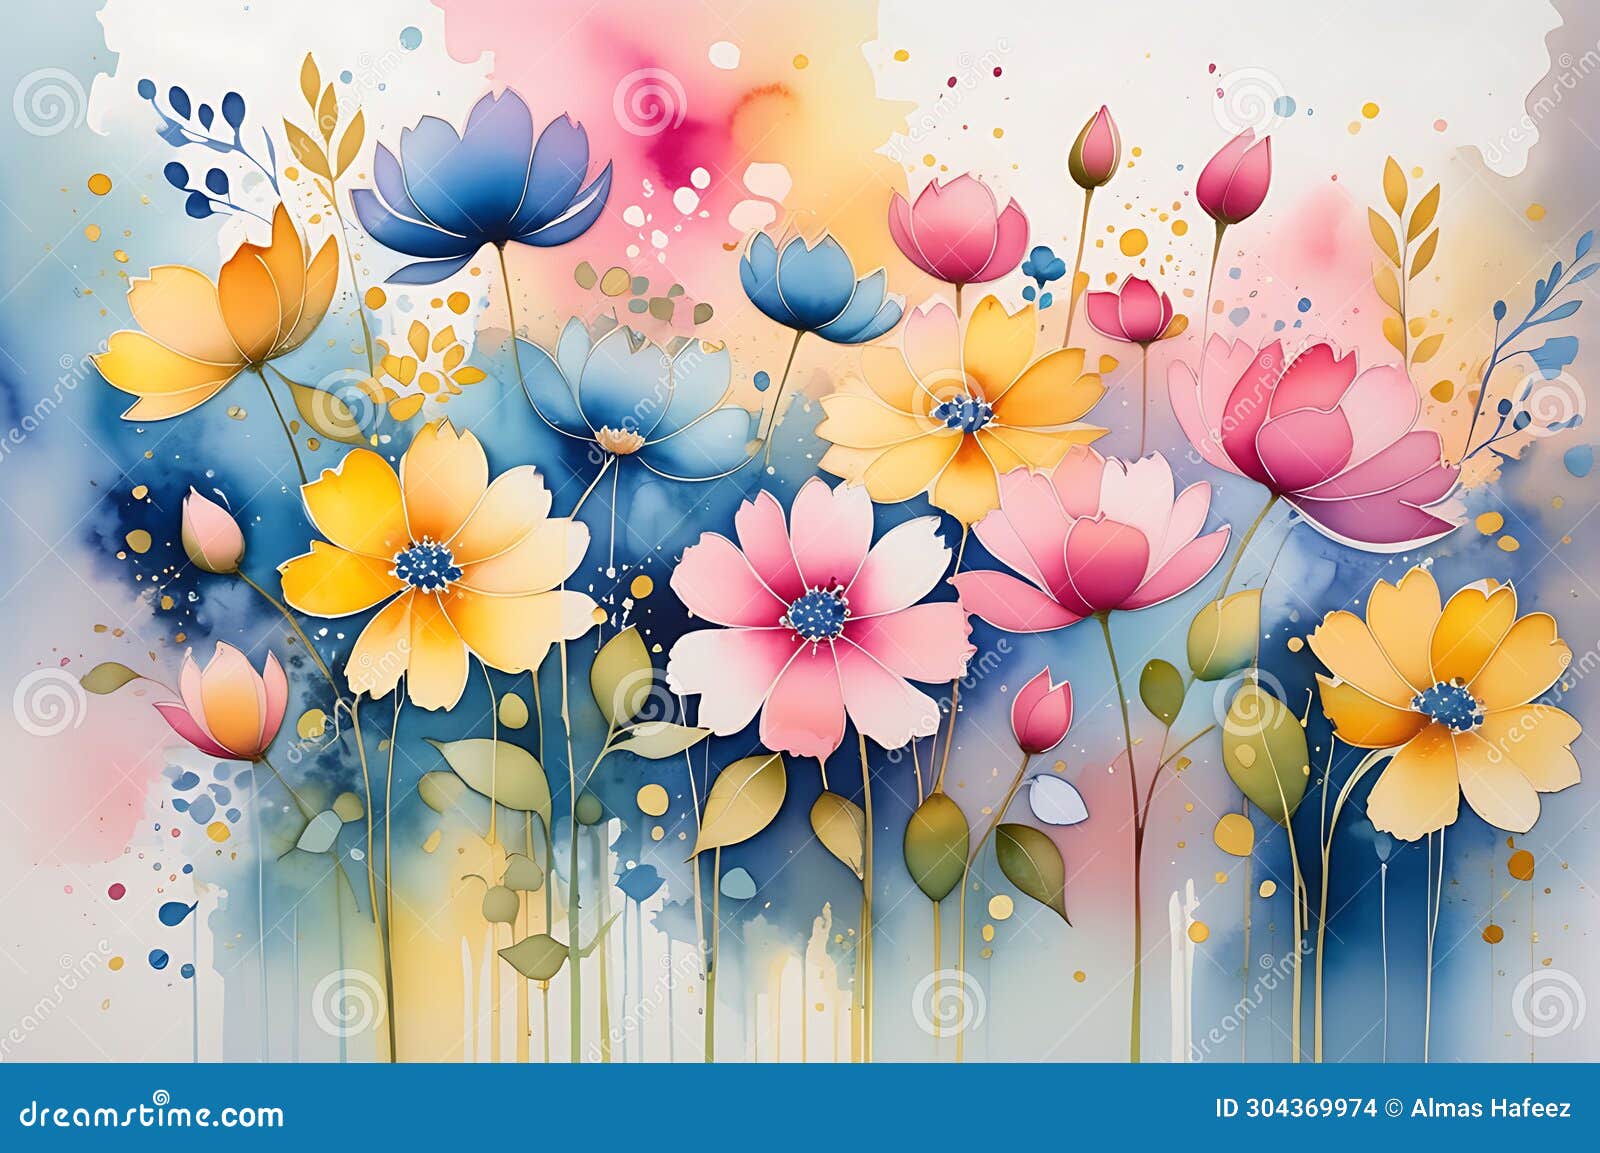 abstract watercolor painting featuring an ensemble of undefined flowers - merging hues of pink, blue